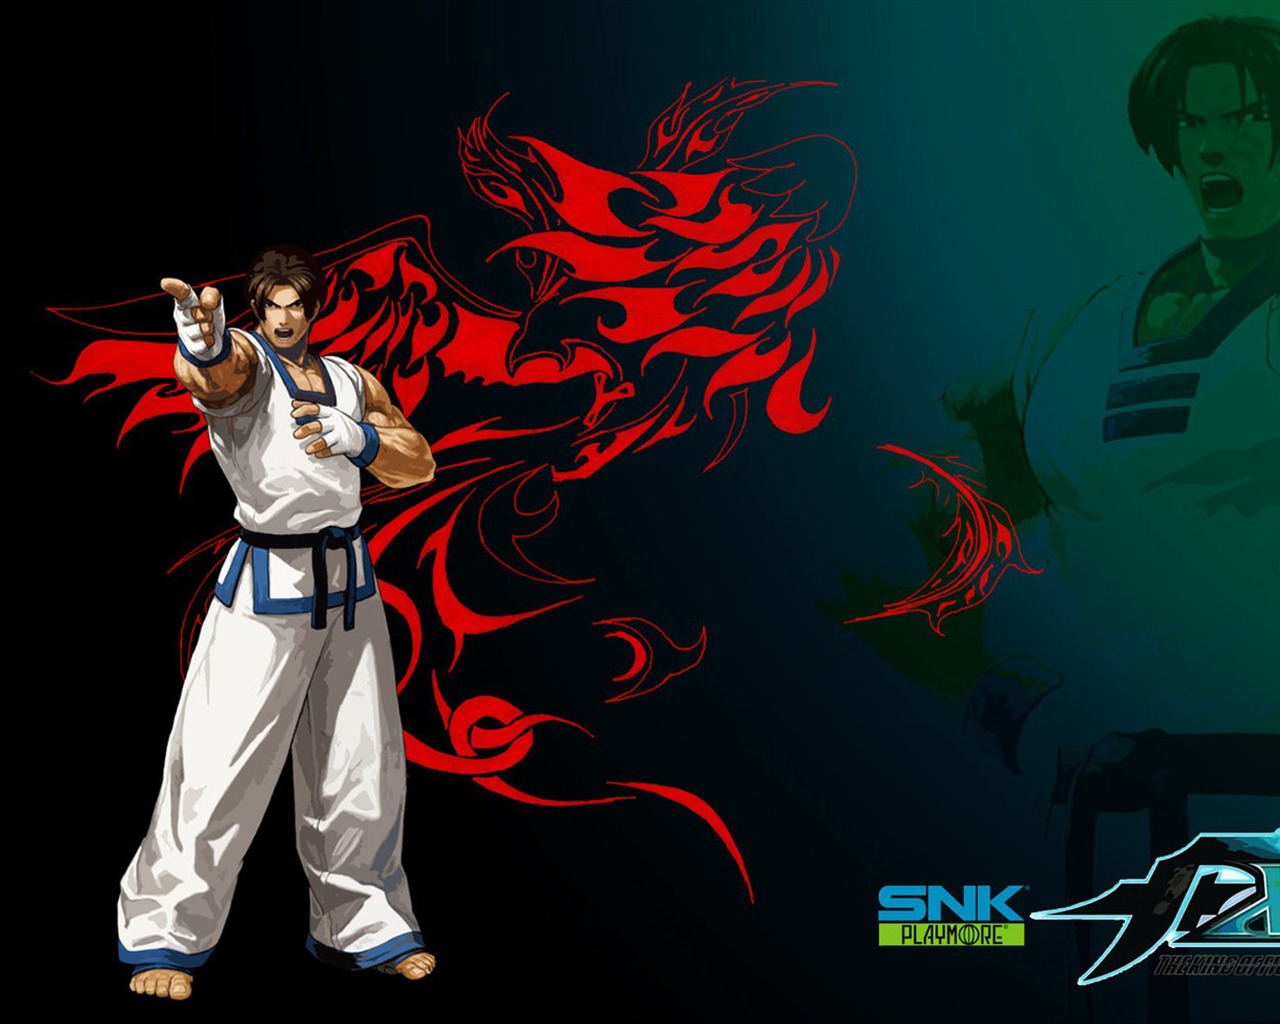 The King of Fighters XIII wallpapers #14 - 1280x1024